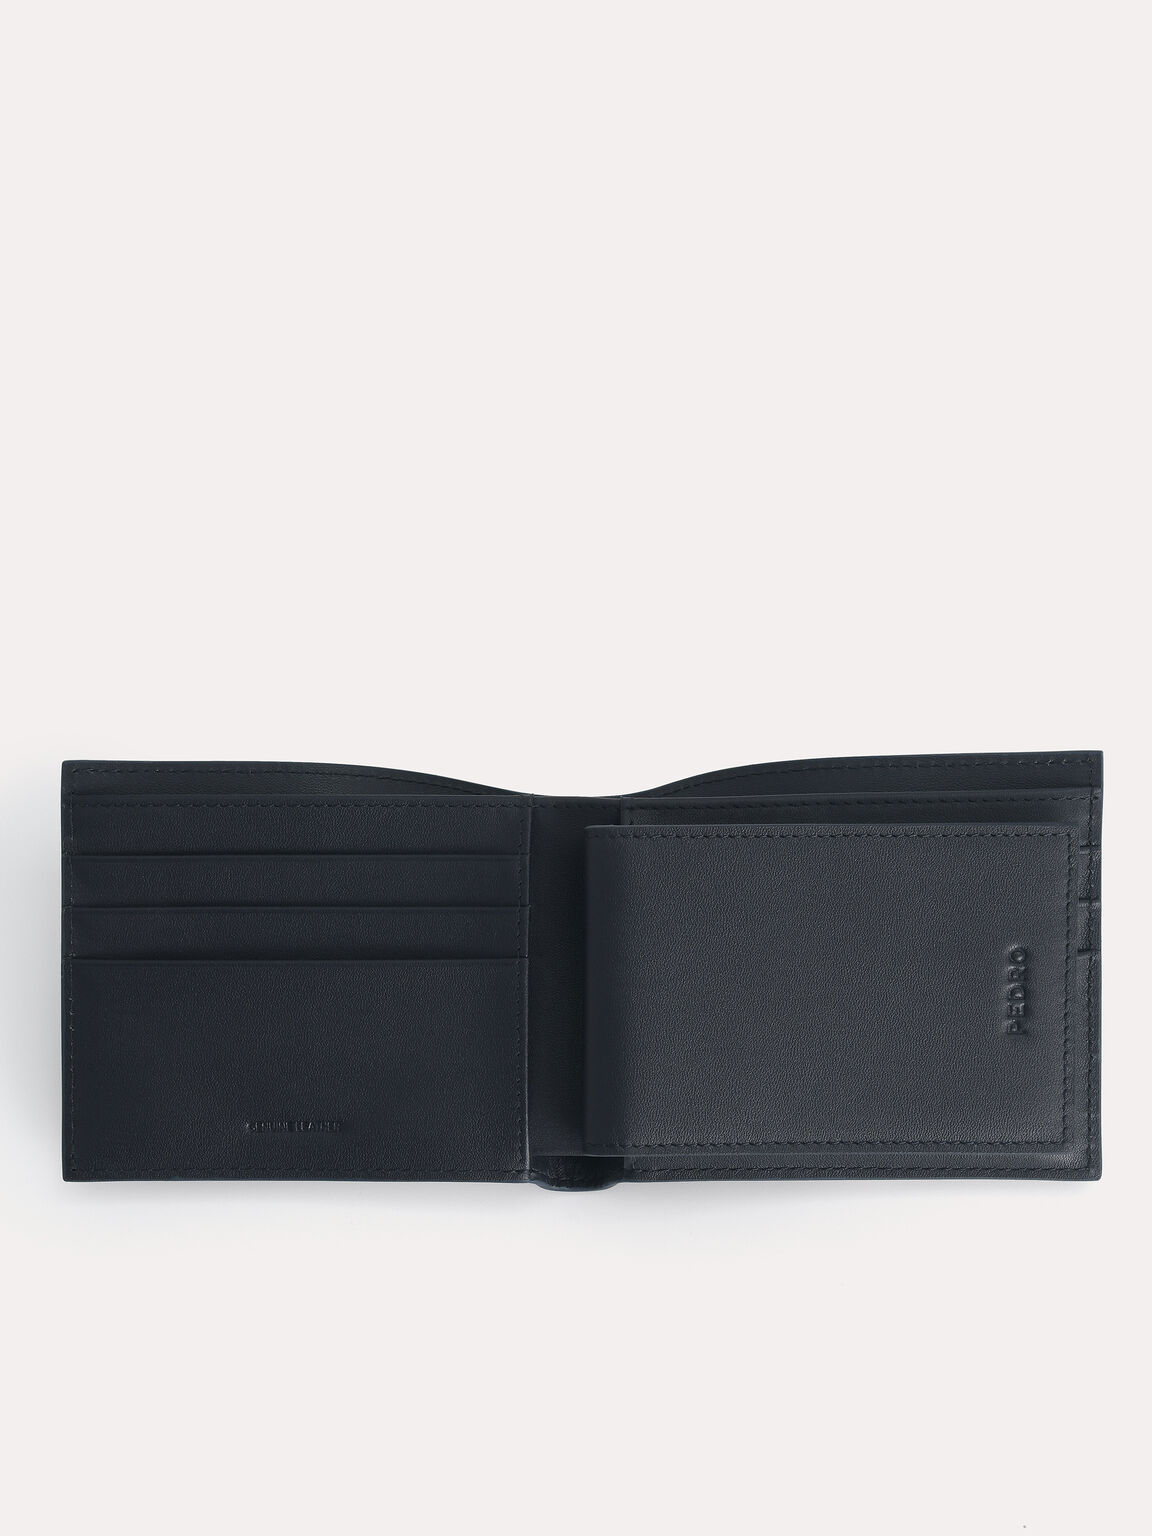 Textured Leather Bi-Fold Wallet with Insert, Navy